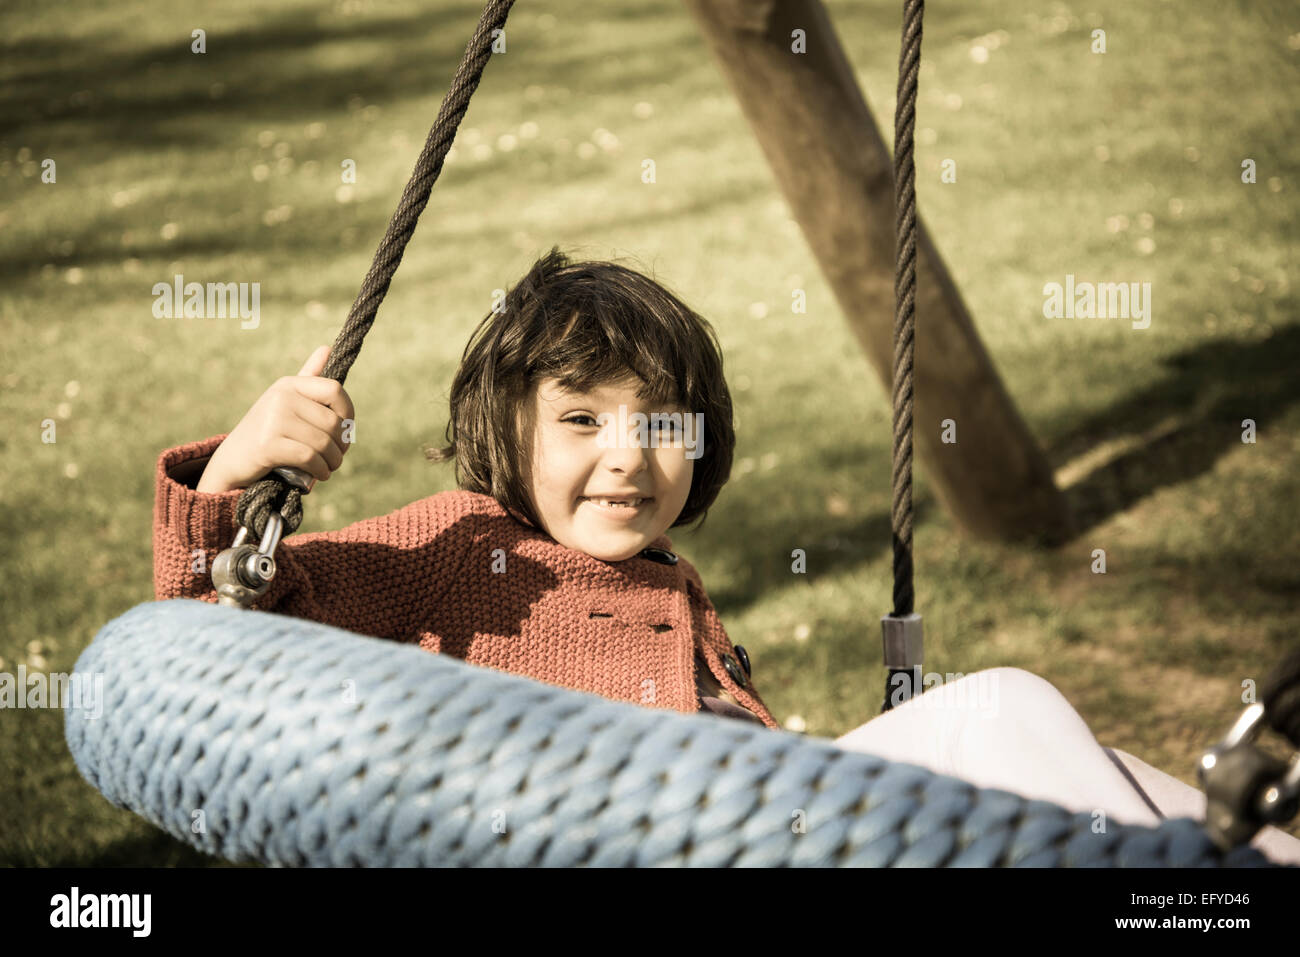 Little girl in a swing in playground Stock Photo